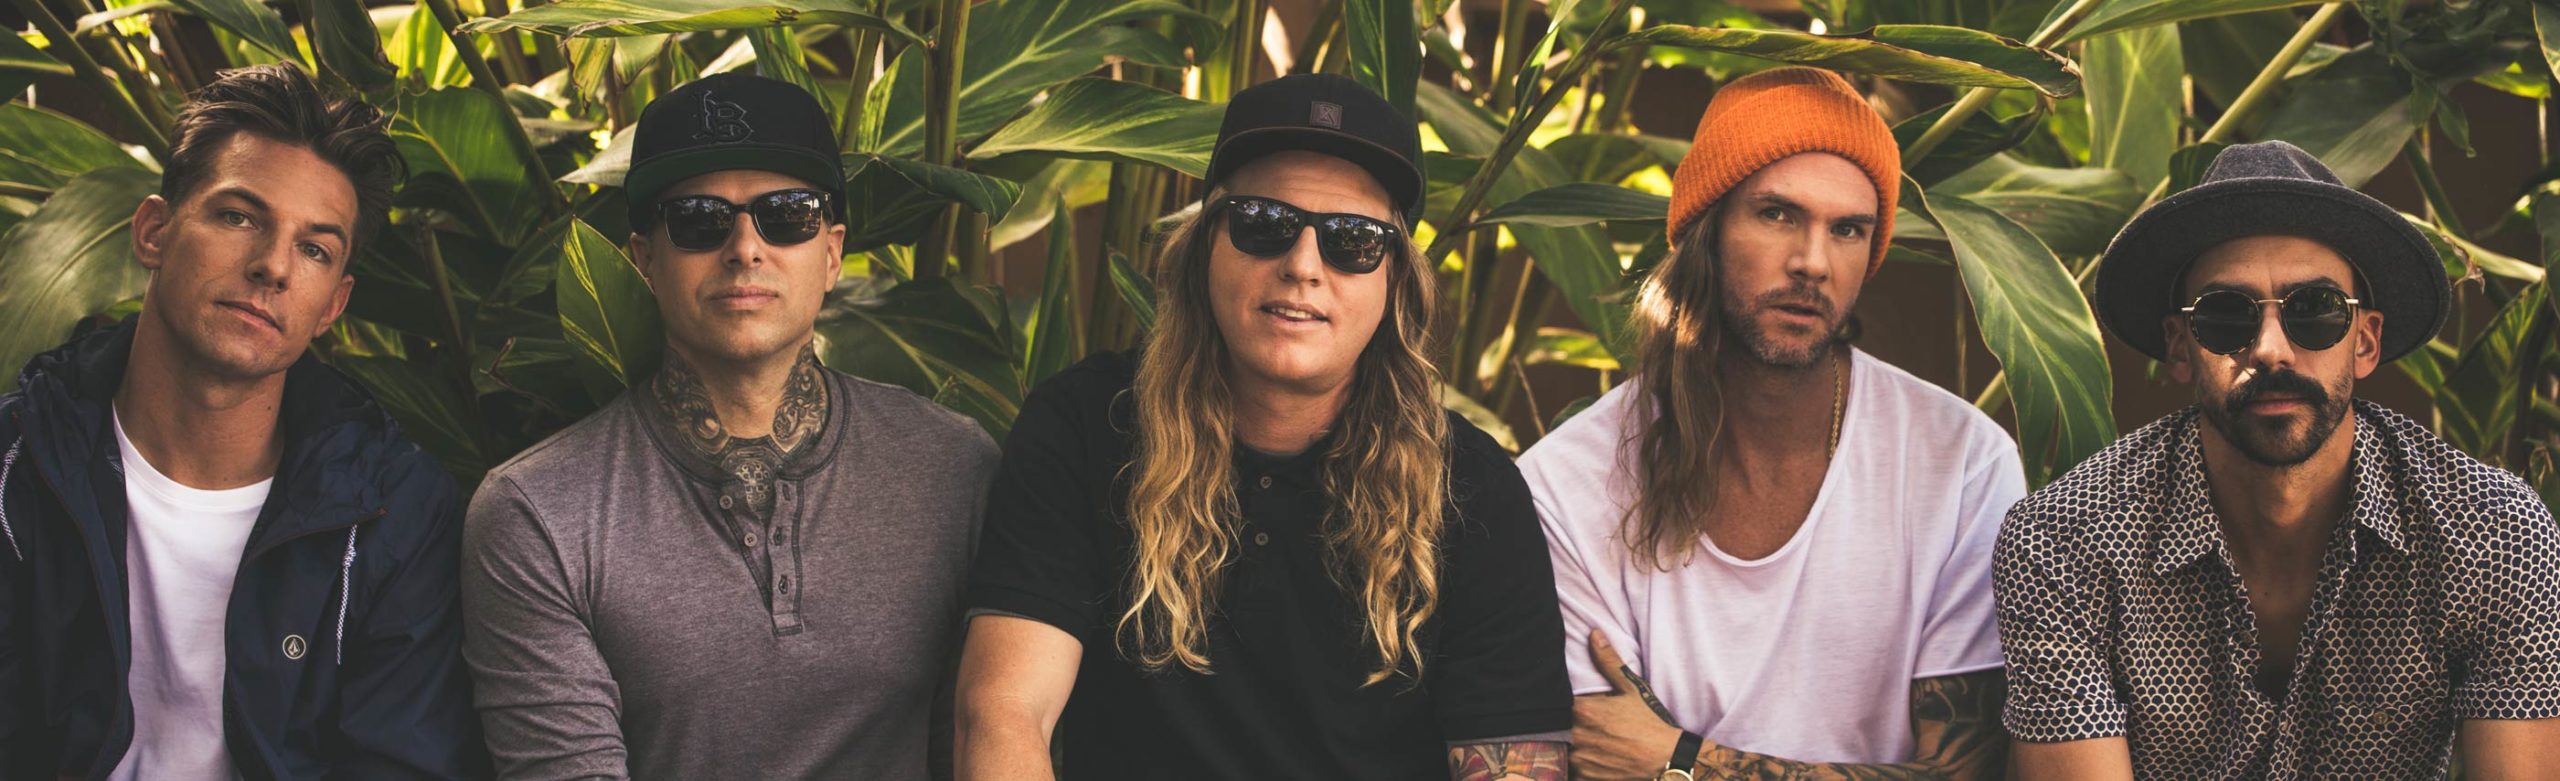 Dirty Heads’ Jared Watson Chats With Logjam Ahead of KettleHouse Performance Image